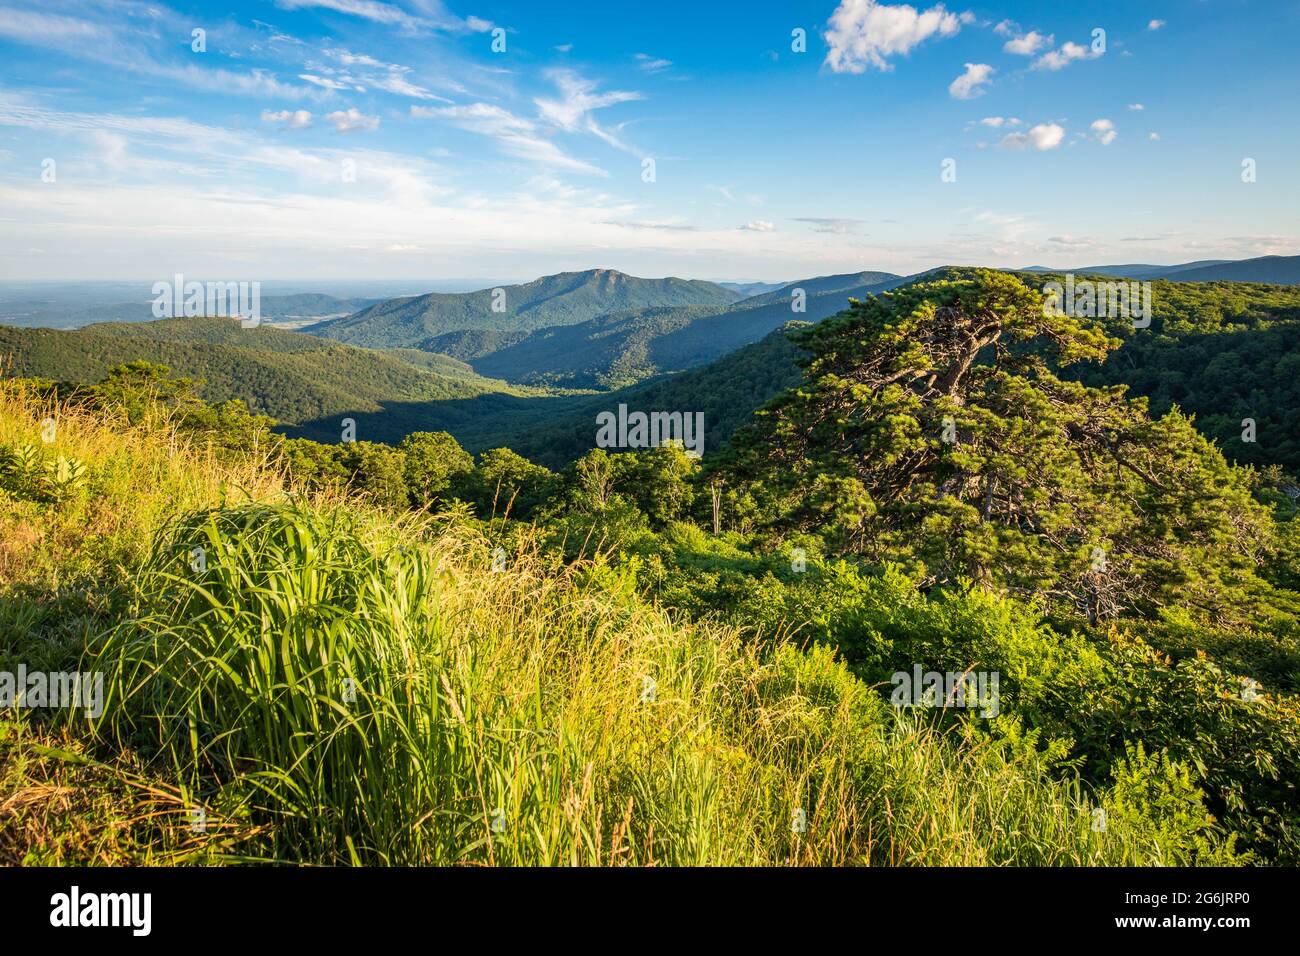 Scenic overlook of Shenandoah blue ridge mountains and hills at sunset Stock Photo